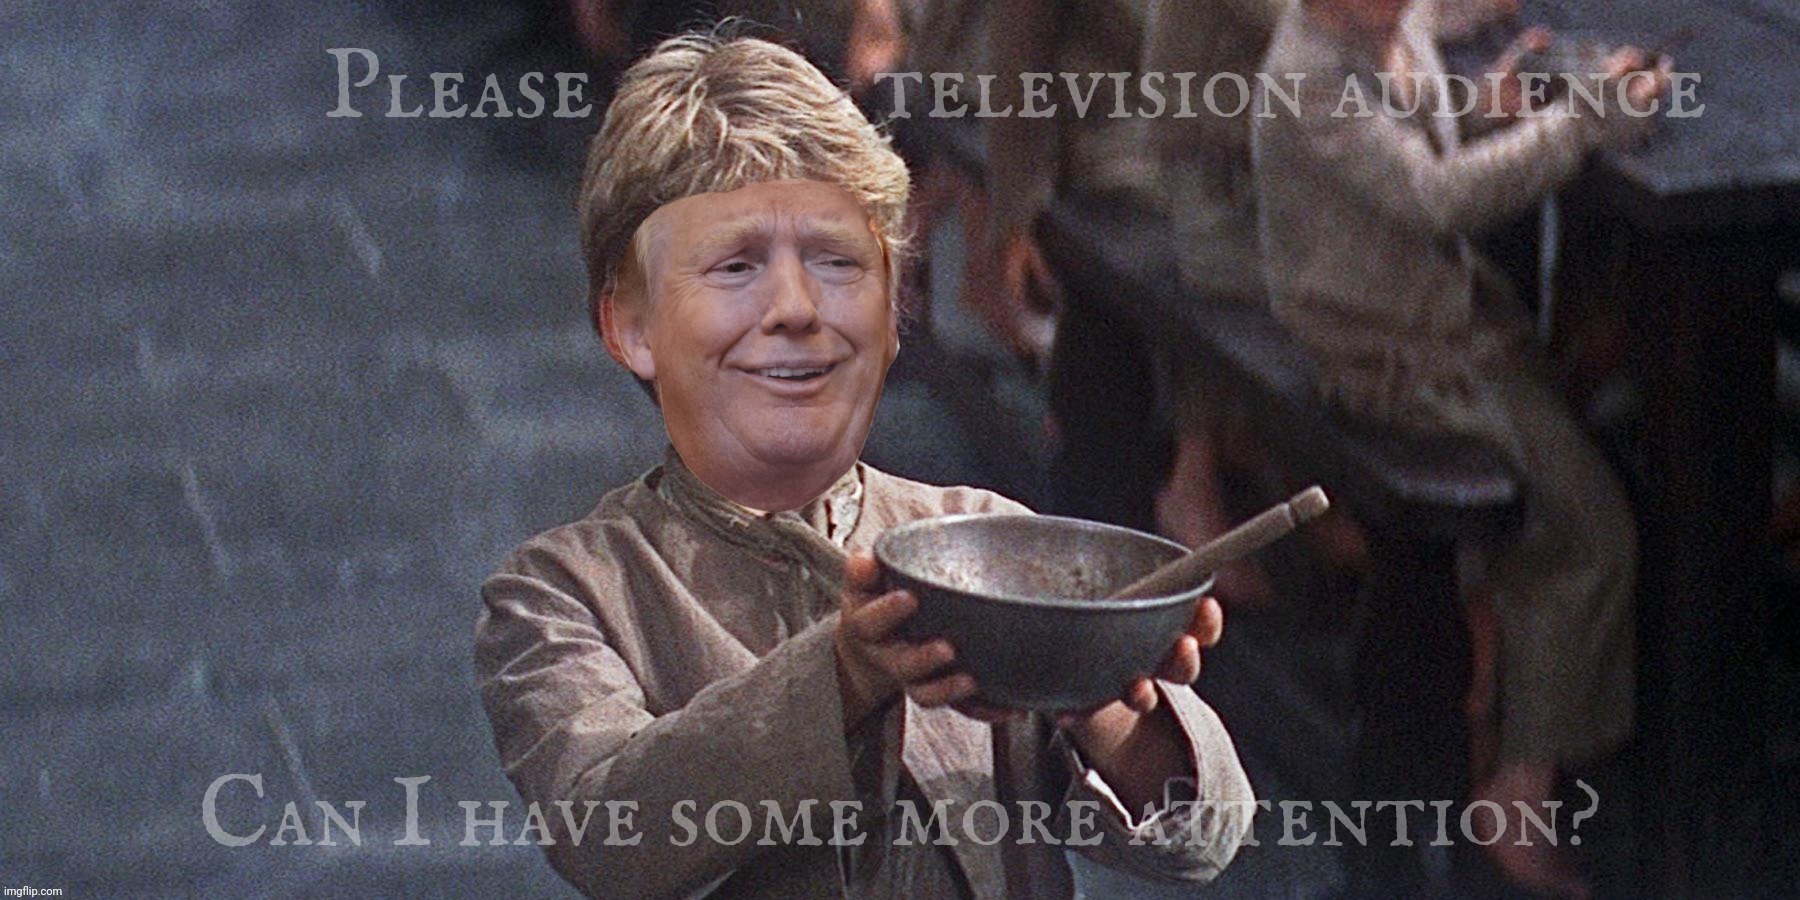 Attention seeking at its whiniest | Please             television audience Can I have some more attention? | image tagged in oliver twist,please sir may i have some more,oliver twist with a twist,oliver twist with a twist of trump,trump,donald trump | made w/ Imgflip meme maker